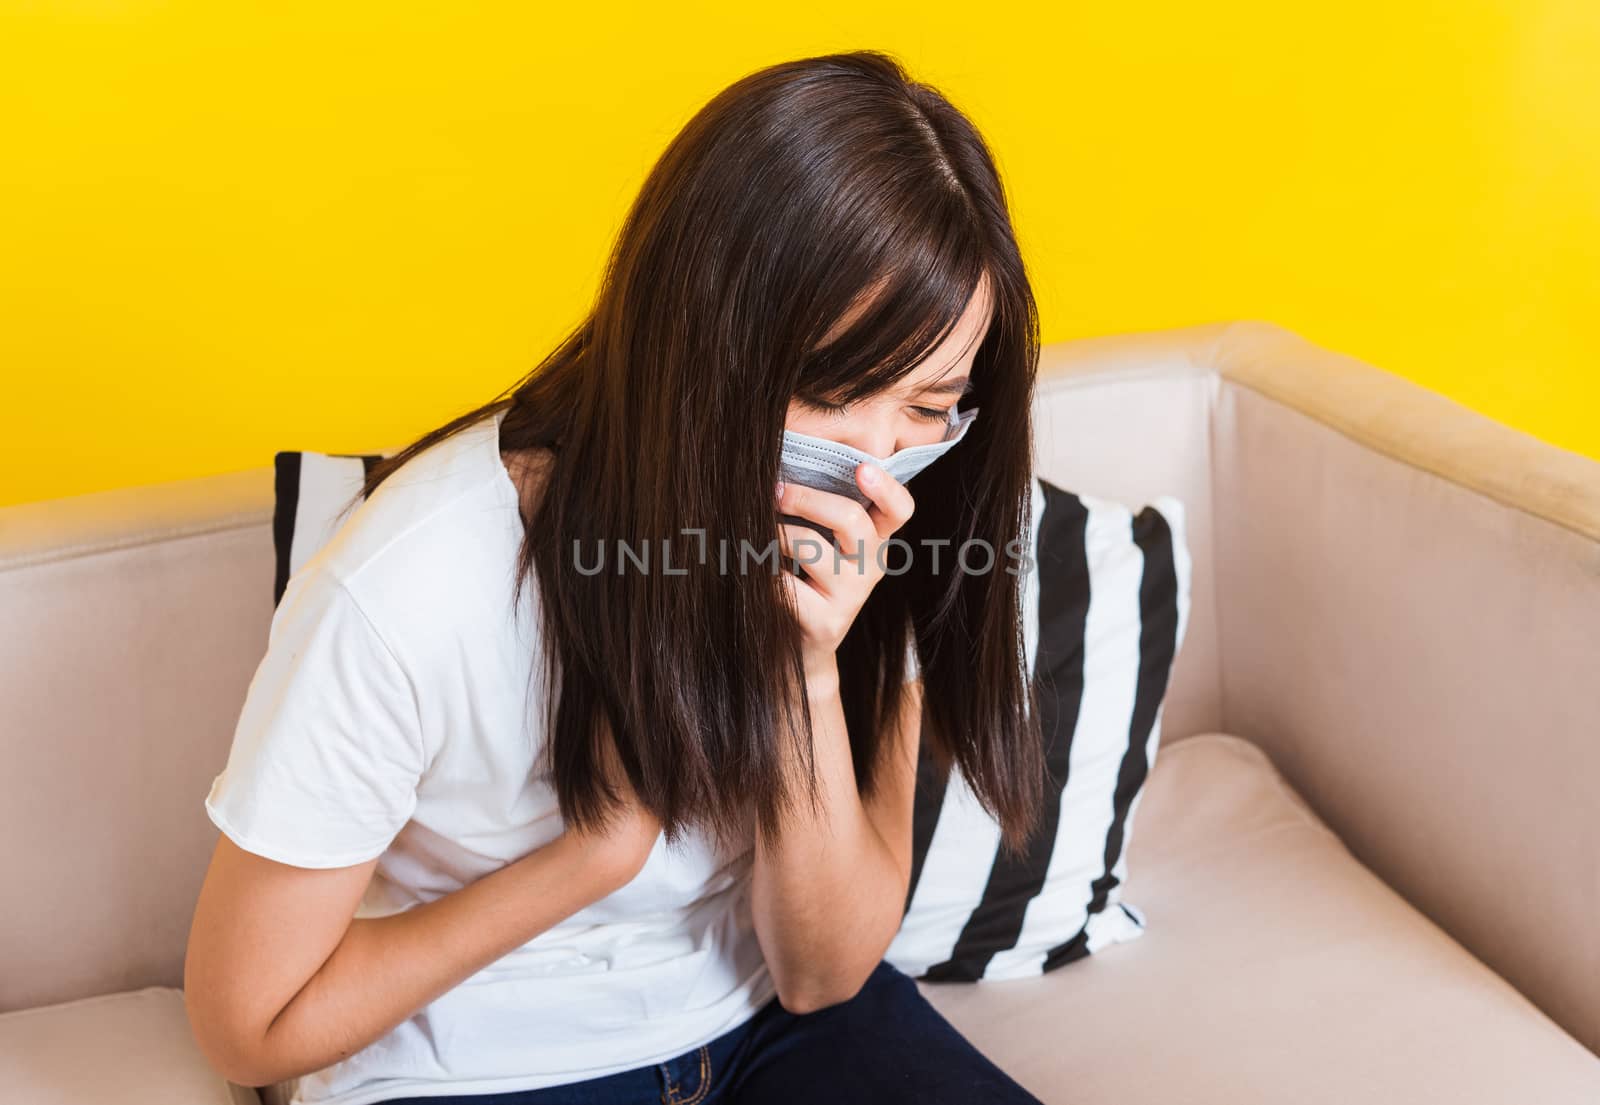 Woman sitting on sofa wearing protection face mask hygiene again by Sorapop